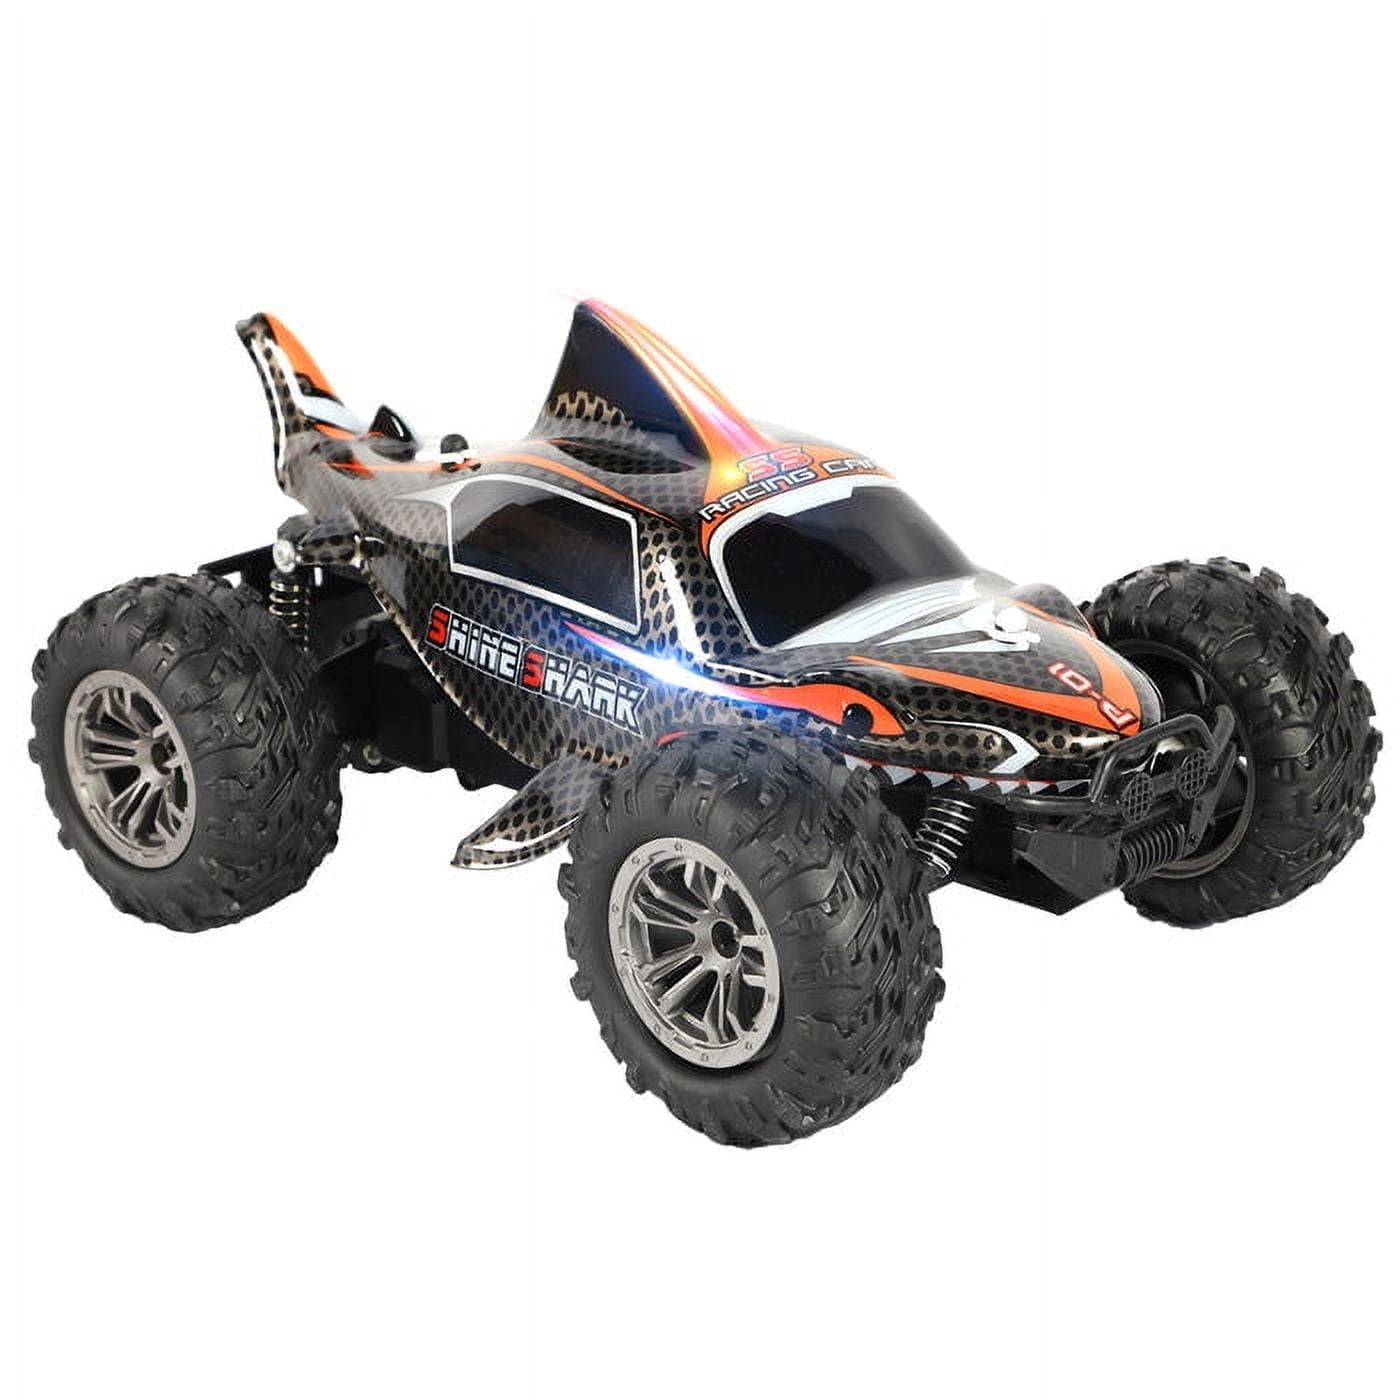 Comprar TEMI RC Cars -1:16 Scale Remote Control Car, 4WD High Speed 40 Km/h  All Terrains Electric Vehicle Off Road Monster Truck with Two Rechargeable  Batteries for Boys Kids and Adults en